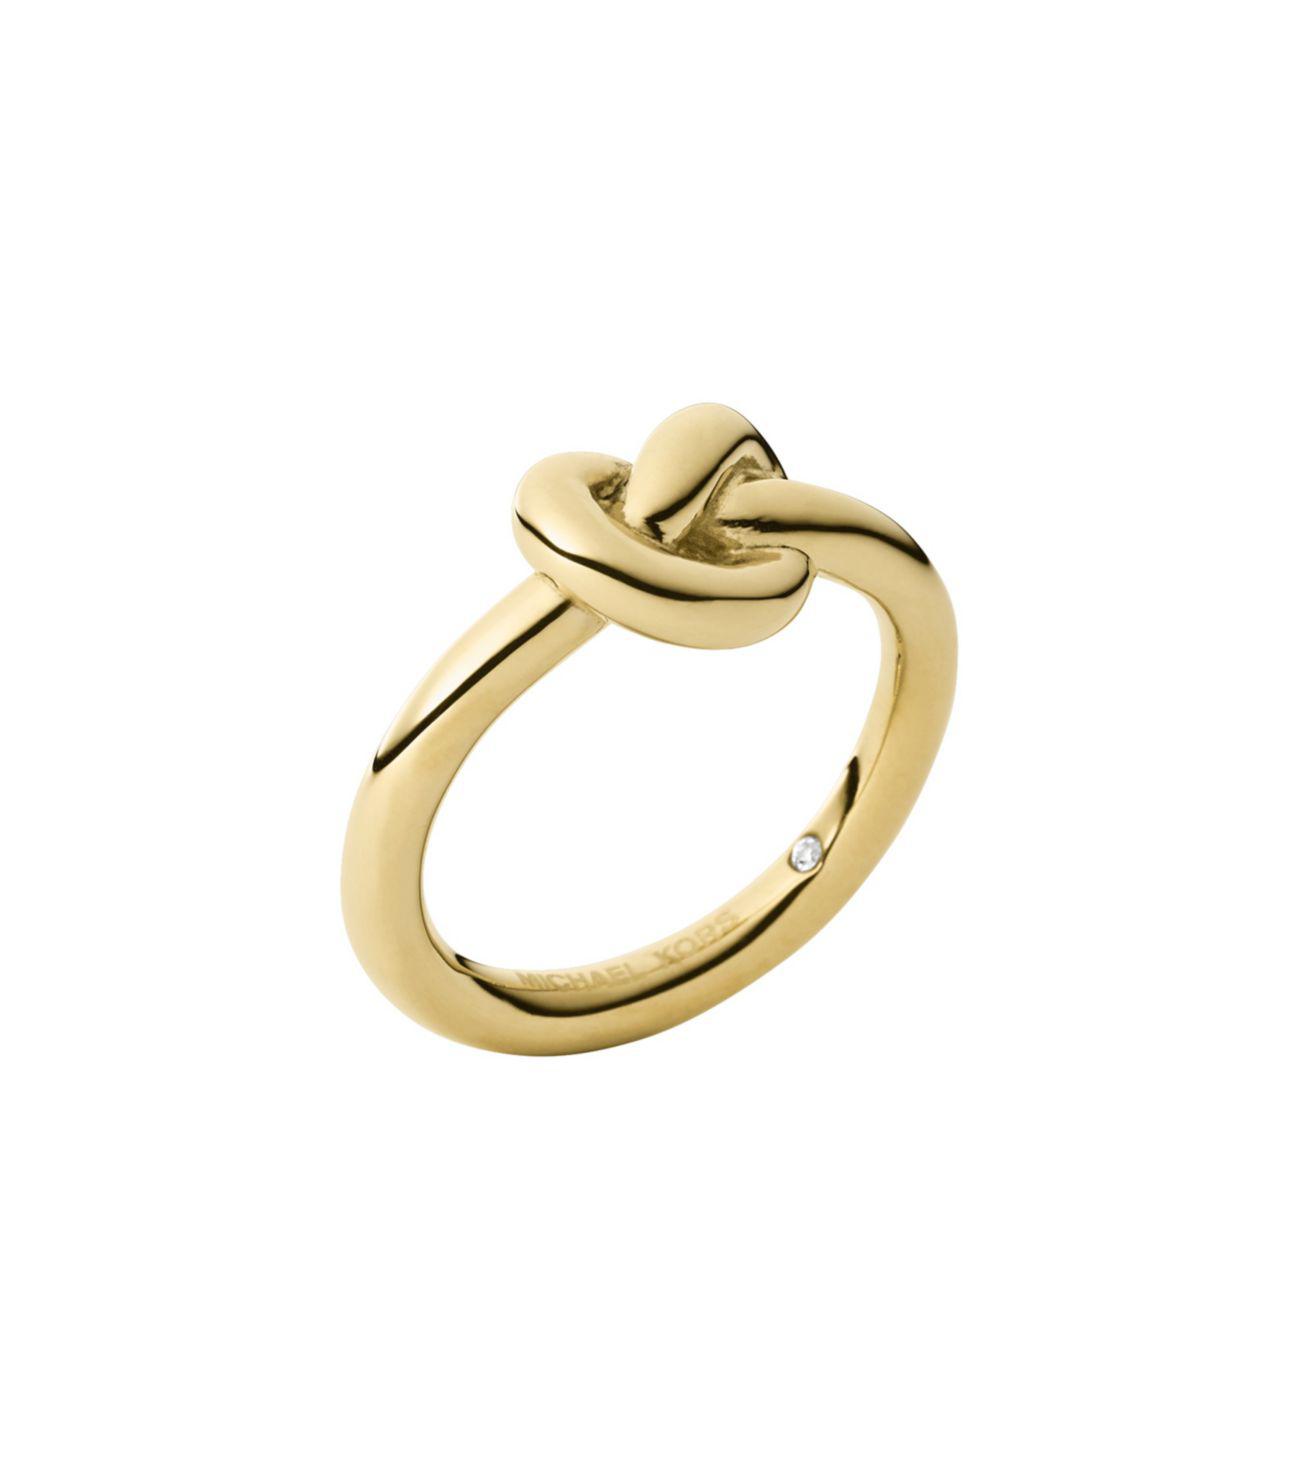 Michael Kors Gold-tone Knot Ring in 